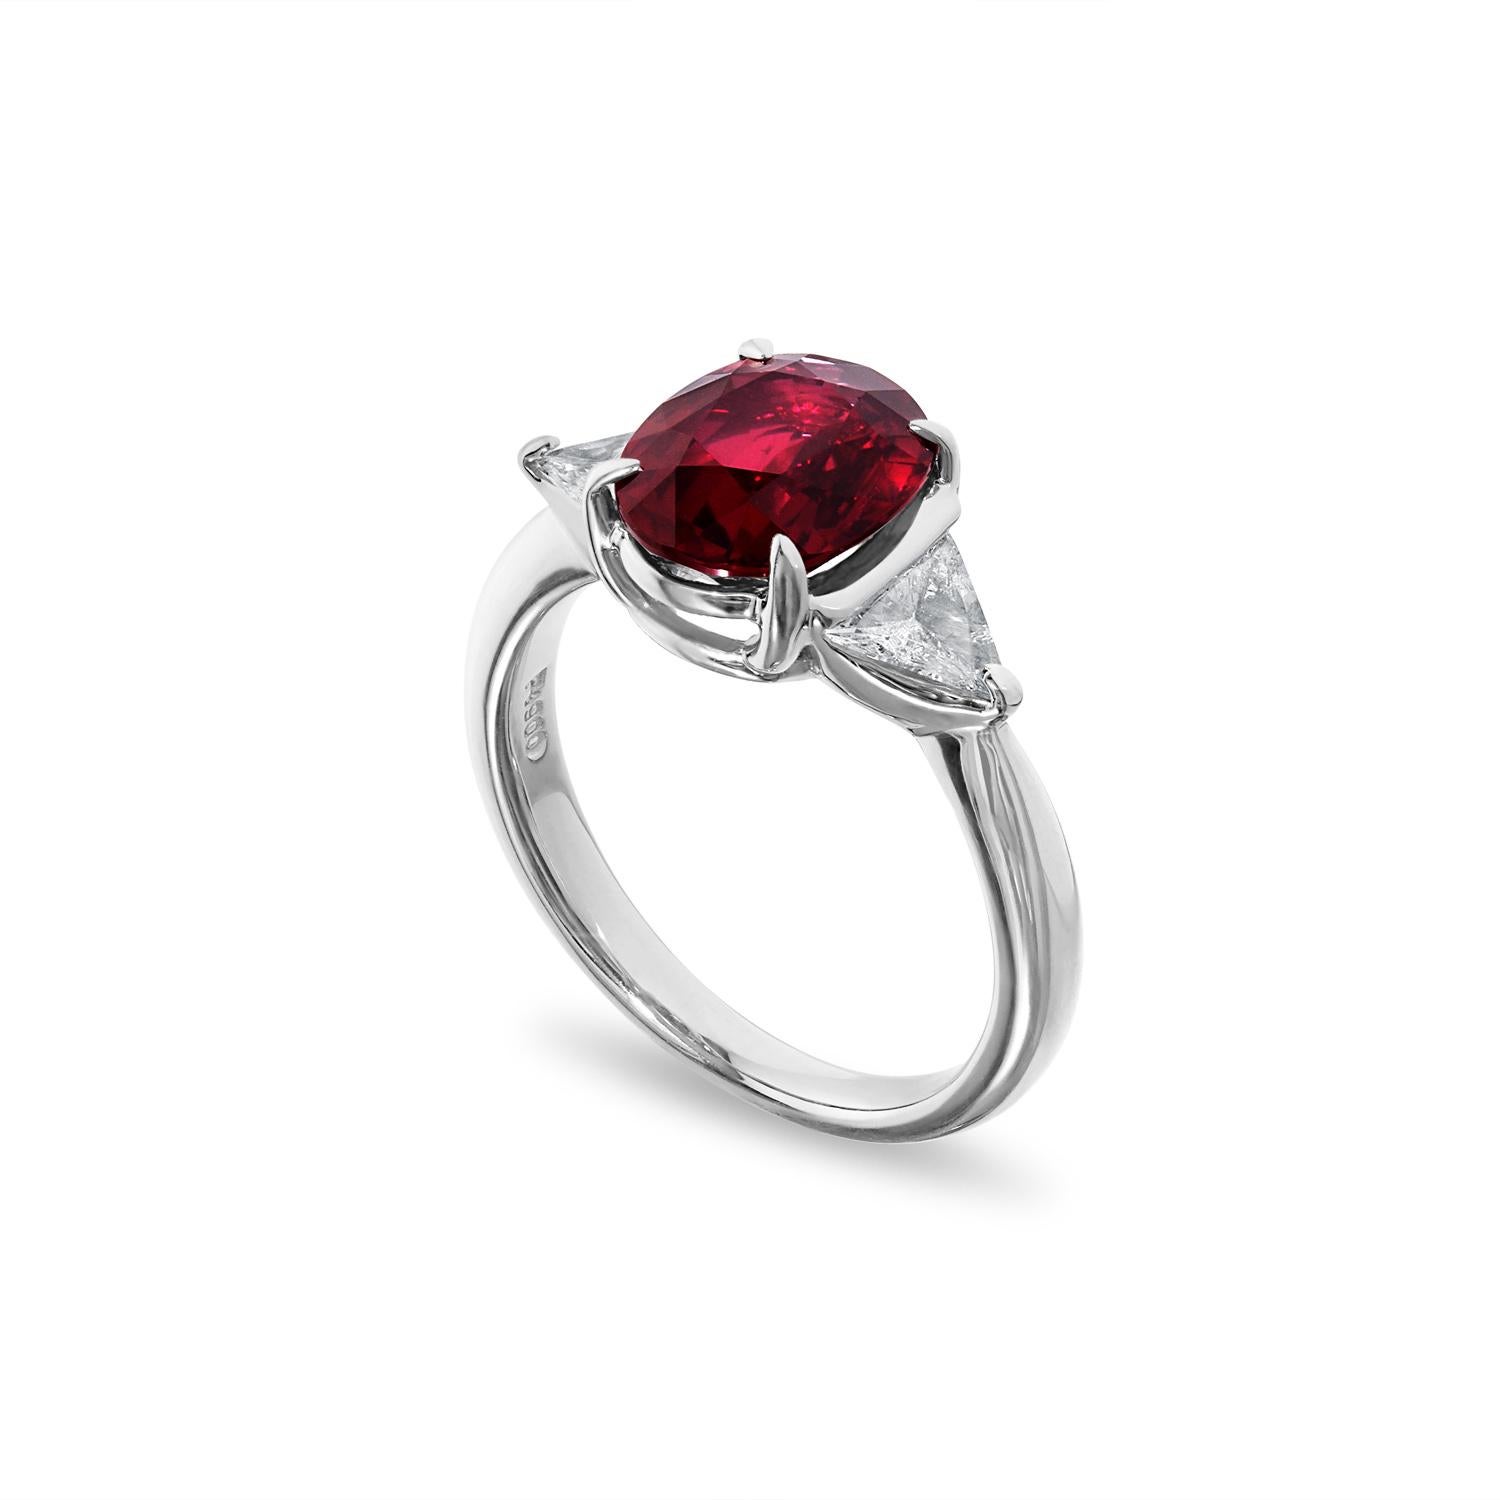 A beautiful 3.02-carat Vivid Red ruby from Mozambique is set along with 0.43 carats of diamonds in this PT ring. Ever classical and a great investment piece, this piece is a head-turner. This piece will come with a GRS report certificate.

The